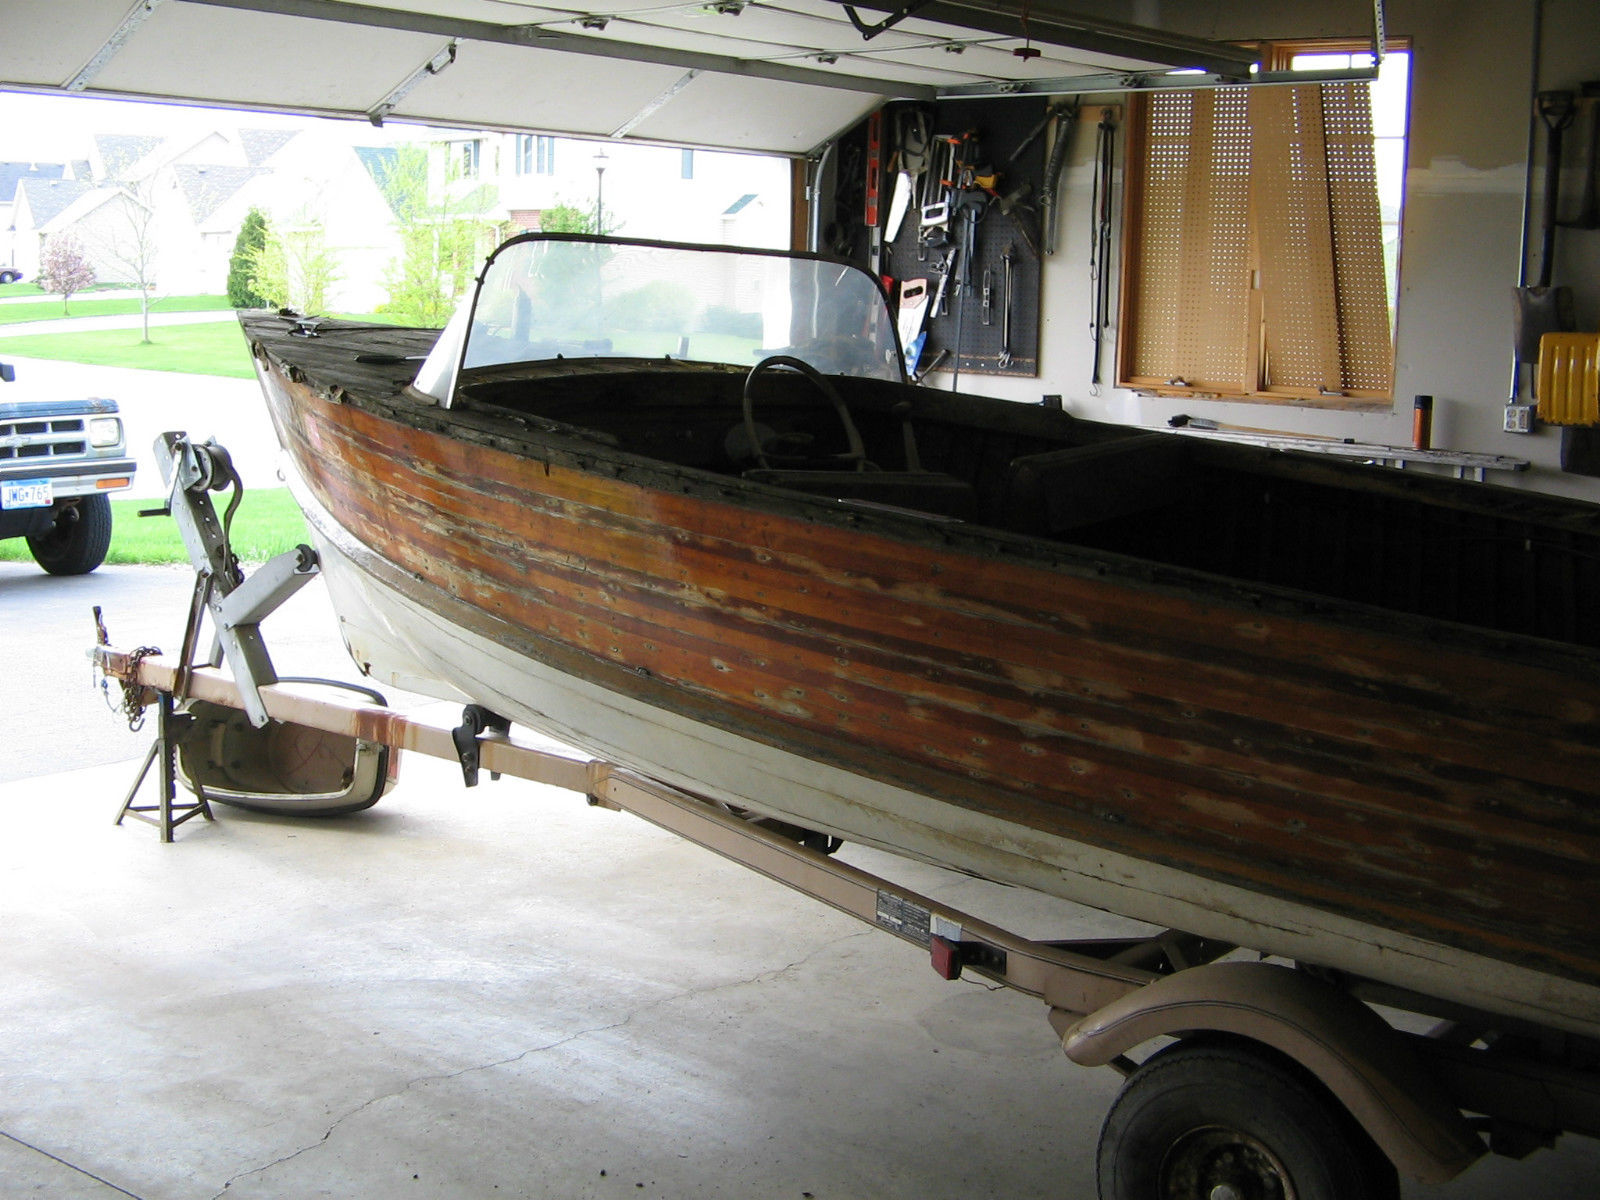 16 foot runabout boat